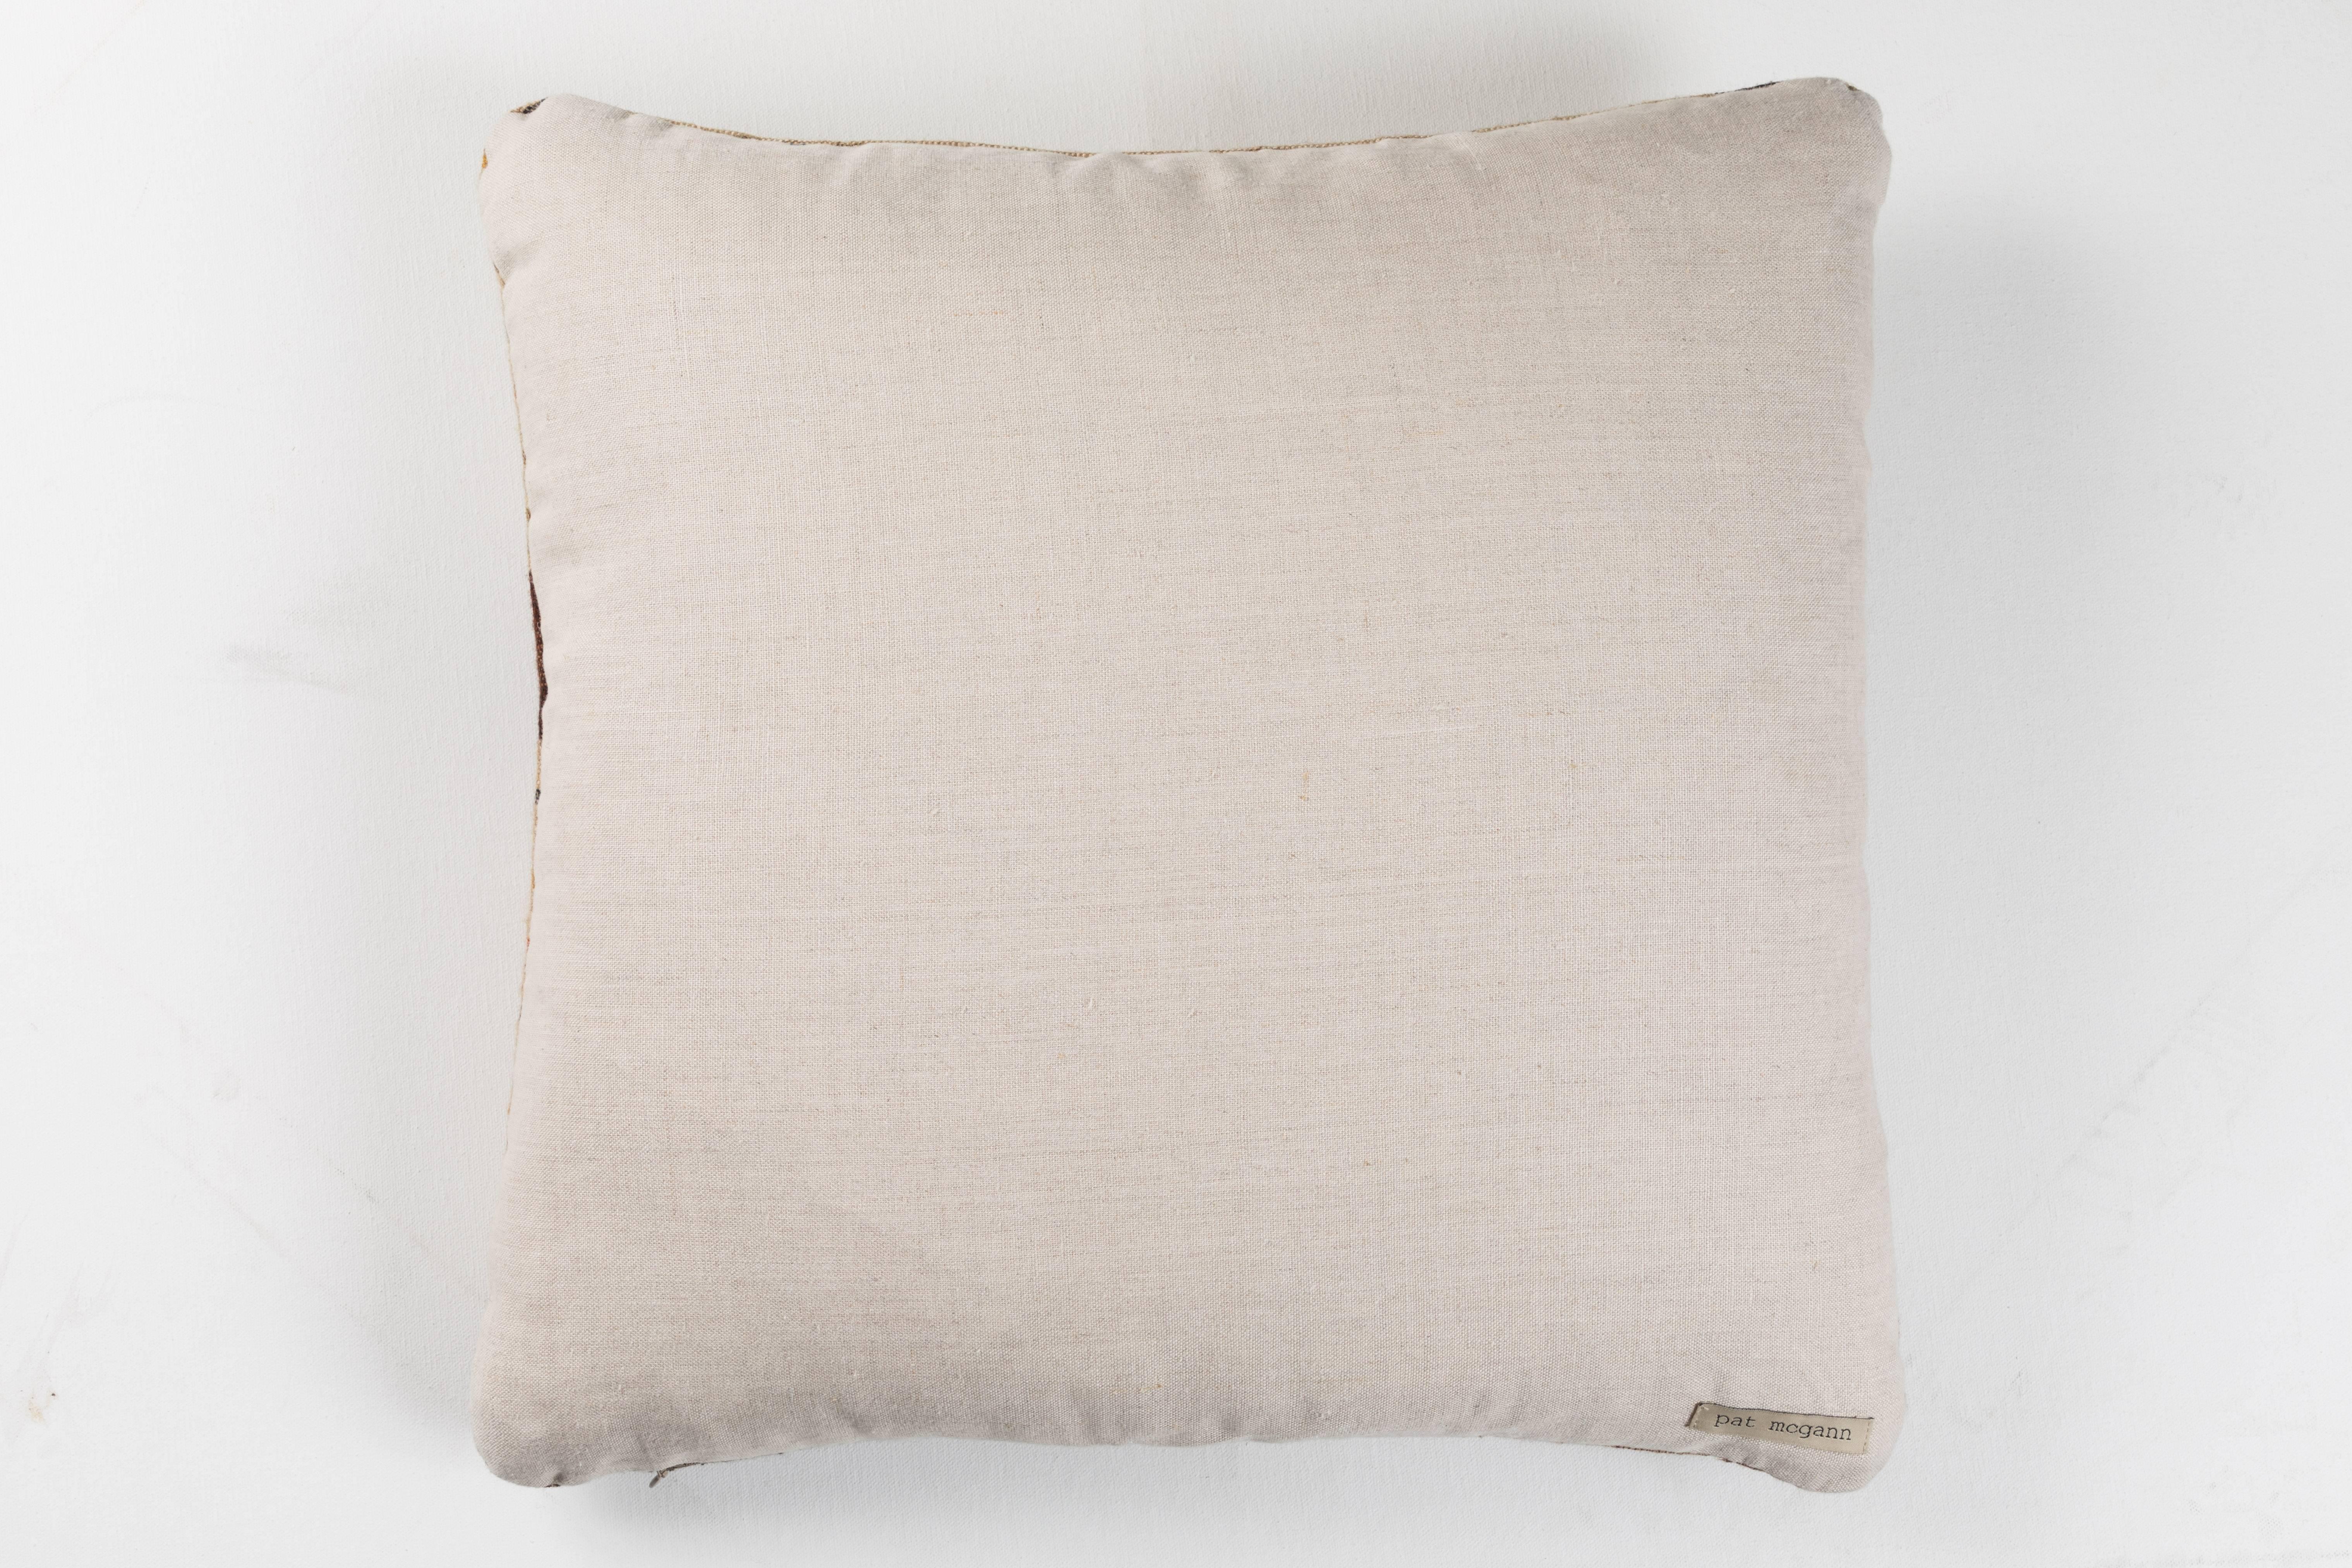 Memo Indian Handwoven Pillow In Excellent Condition For Sale In Los Angeles, CA